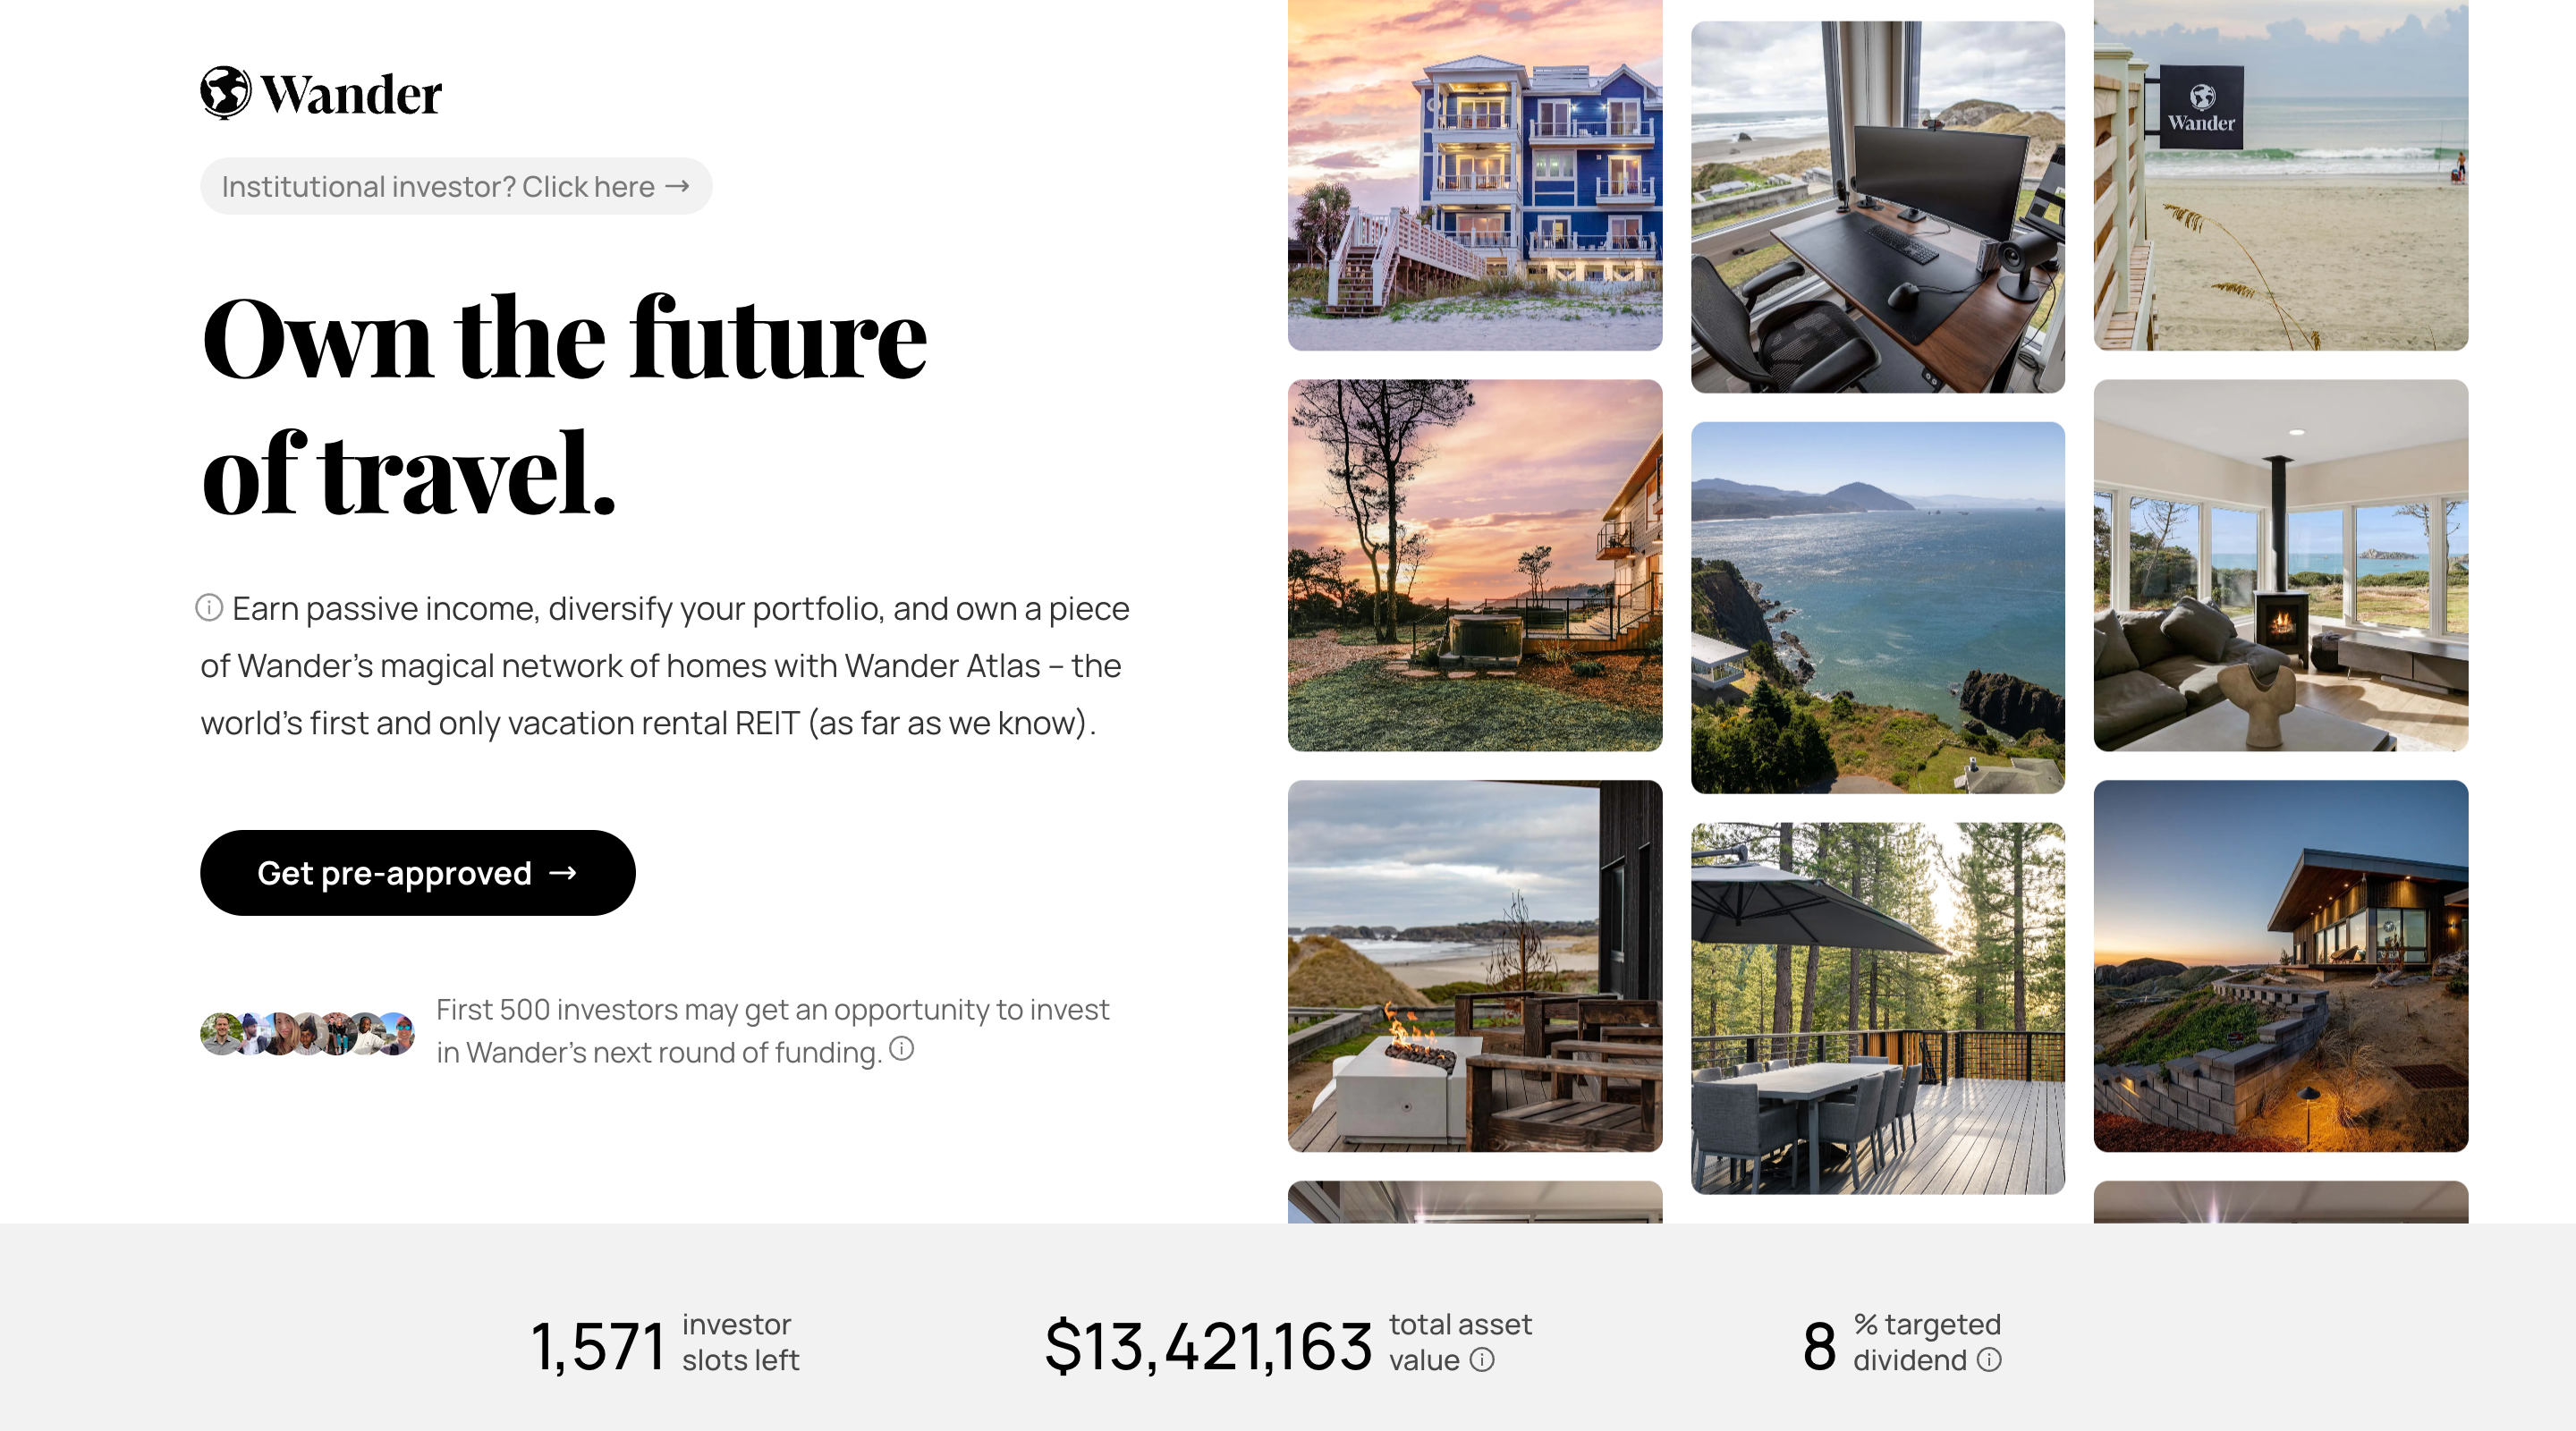 Hero section on the landing page for Wander Atlas — Wander's vacation rental REIT product. The section is split in two. To the left is some text describing Wander Atlas and a button with a call-to-action to get pre-approved. To the right is a 3-column grid with photos of different Wander properties that scrolls vertically.